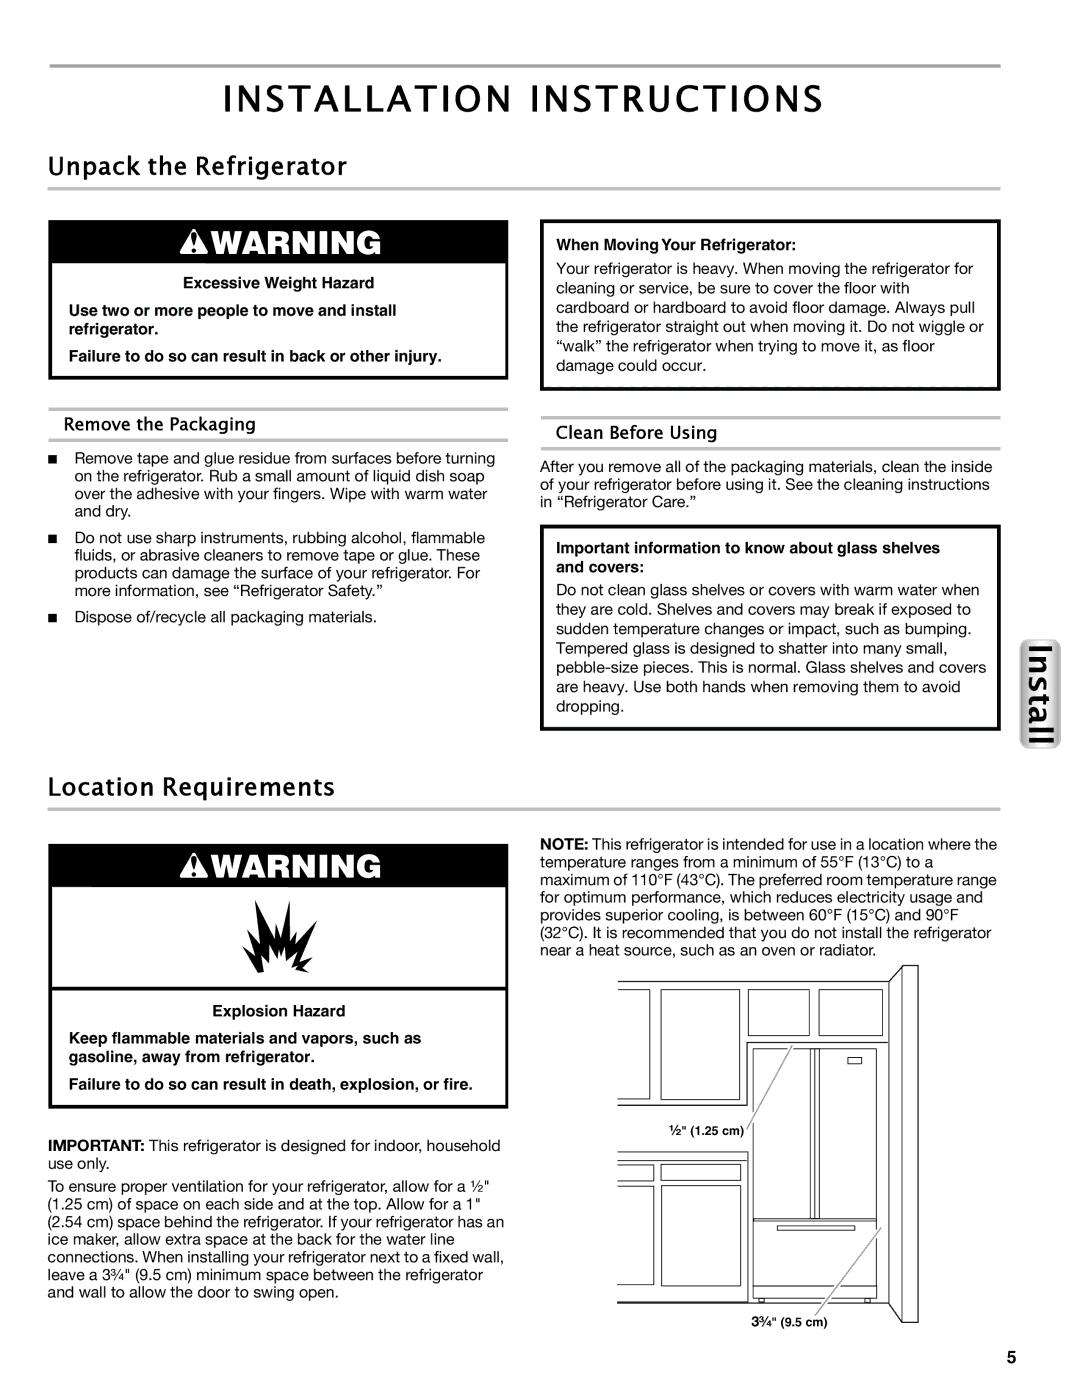 Maytag W10558103A manual Installation Instructions, Unpack the Refrigerator, Location Requirements, Remove the Packaging 